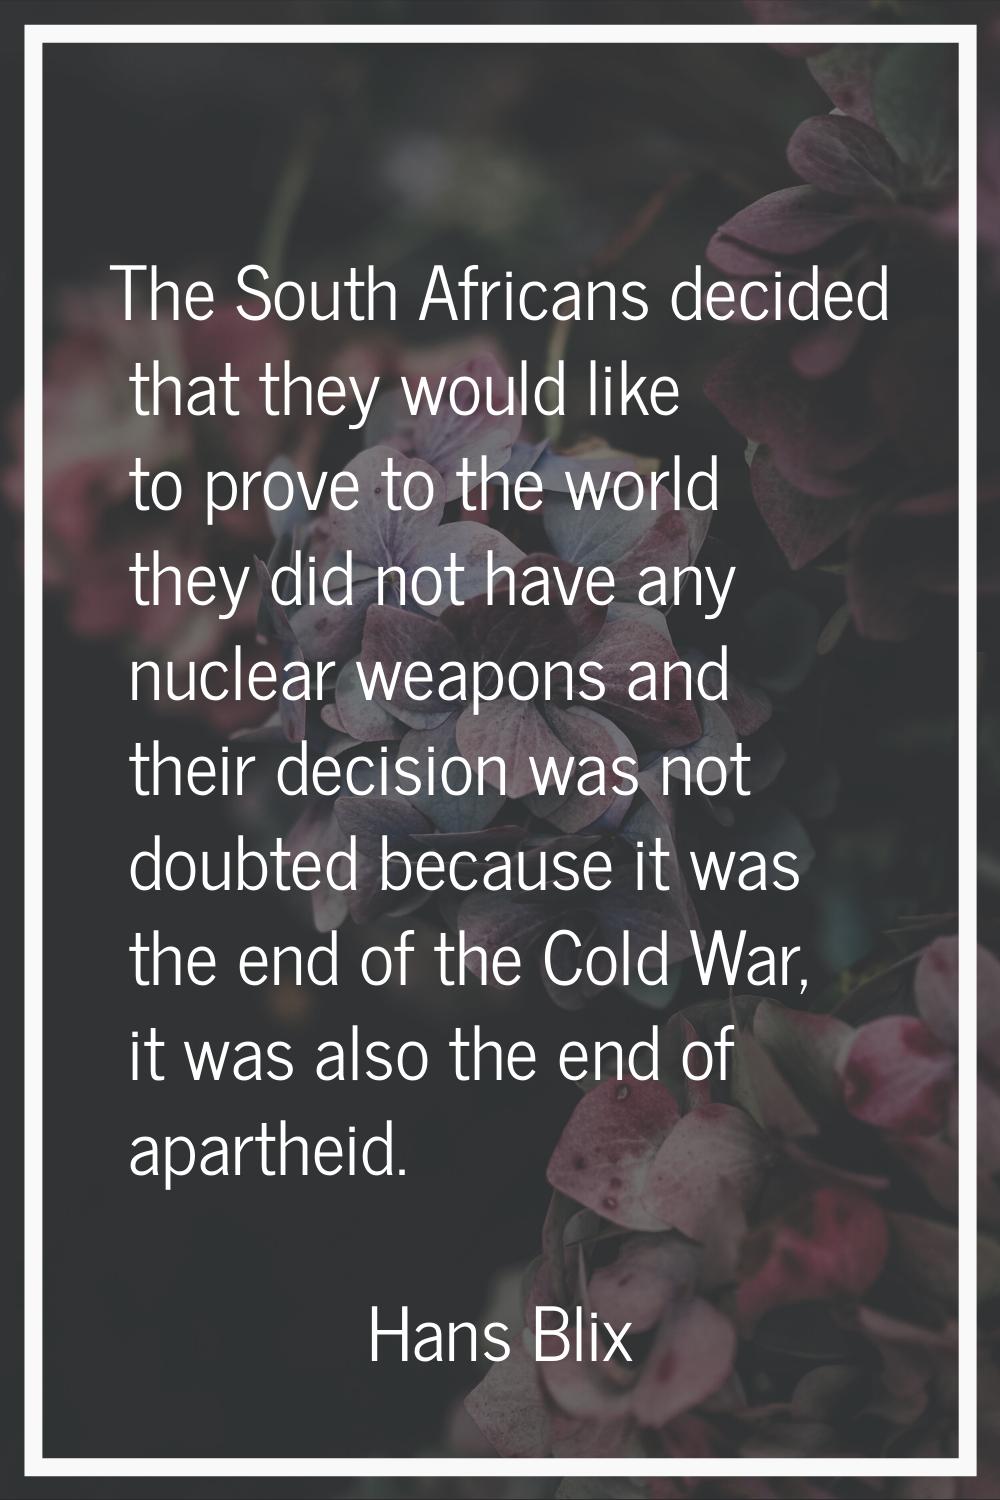 The South Africans decided that they would like to prove to the world they did not have any nuclear